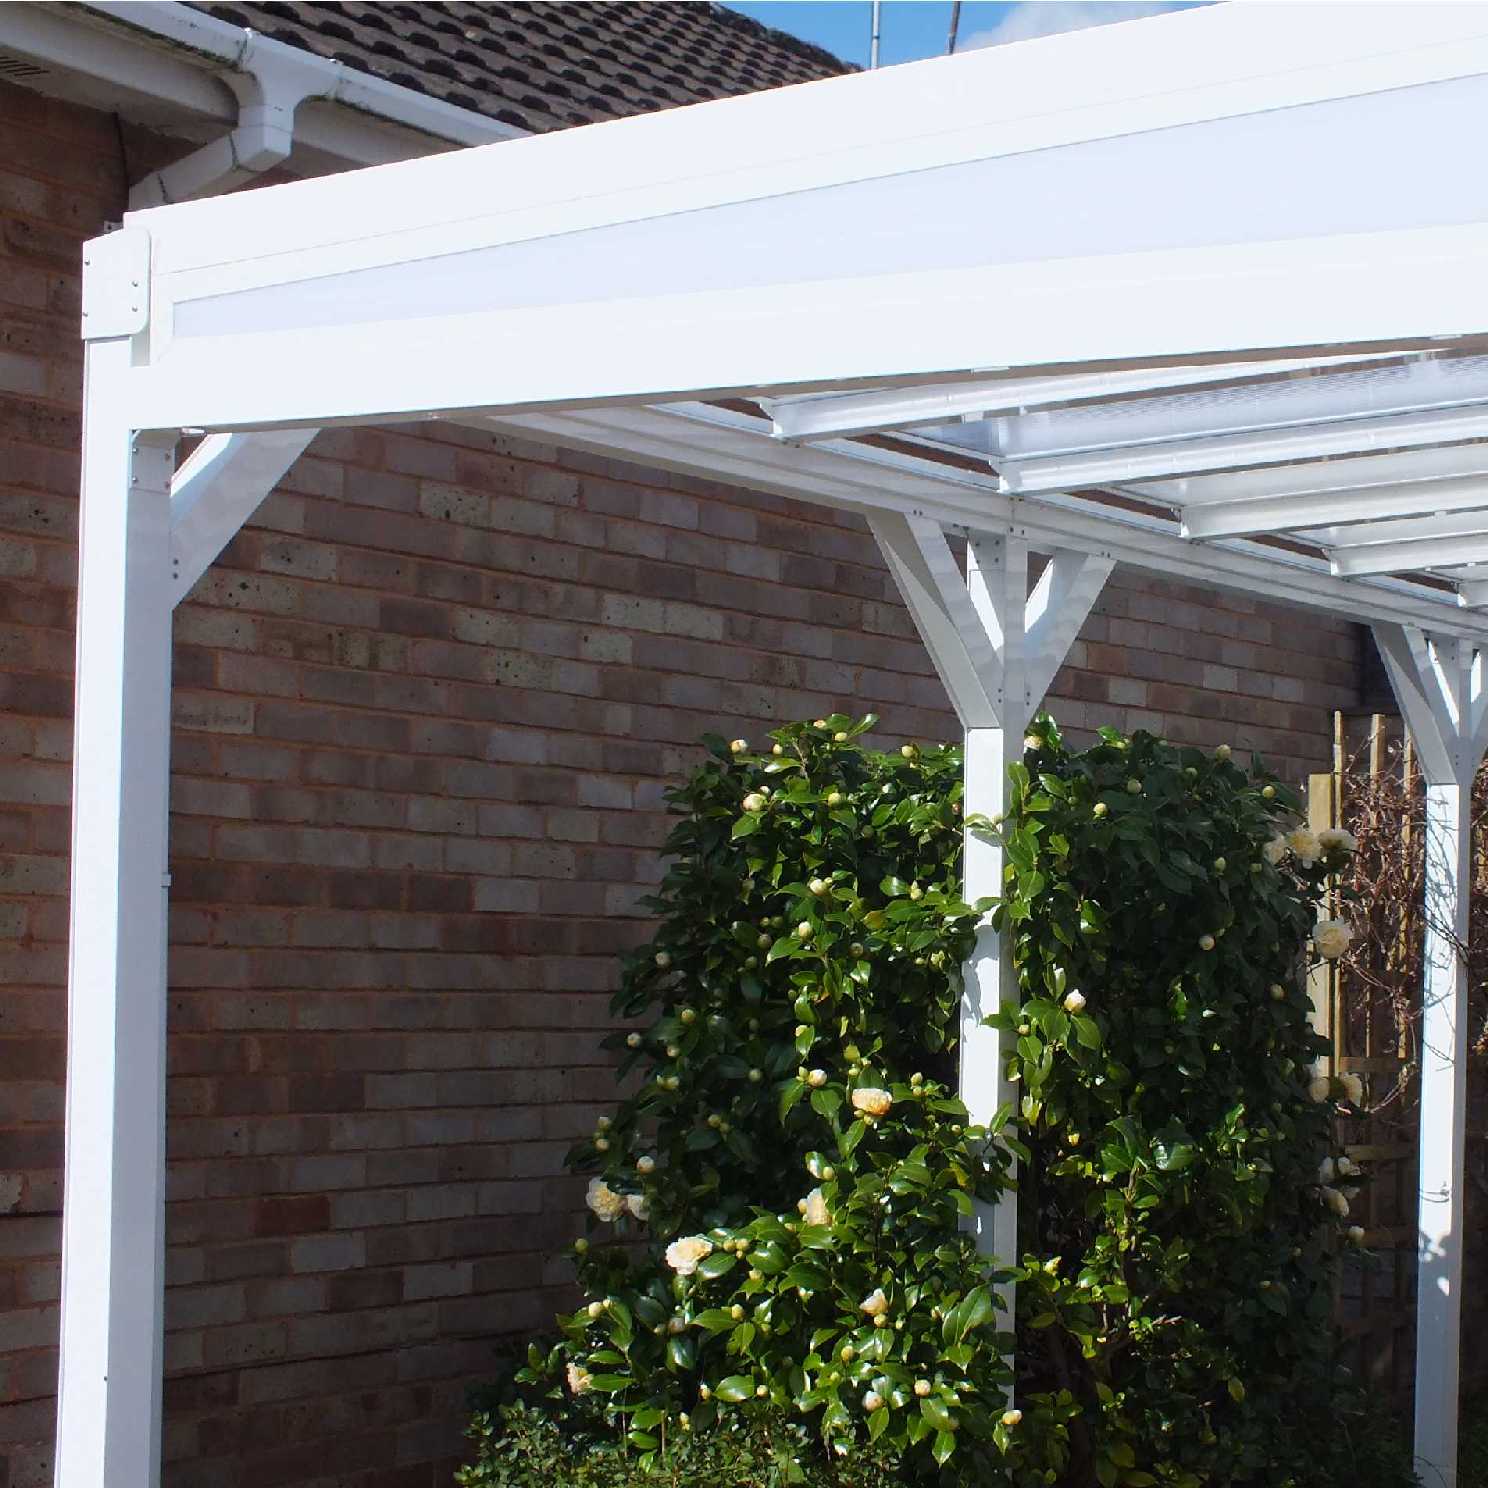 Omega Smart Lean-To Canopy, White with 16mm Polycarbonate Glazing - 2.1m (W) x 2.5m (P), (2) Supporting Posts from Omega Build